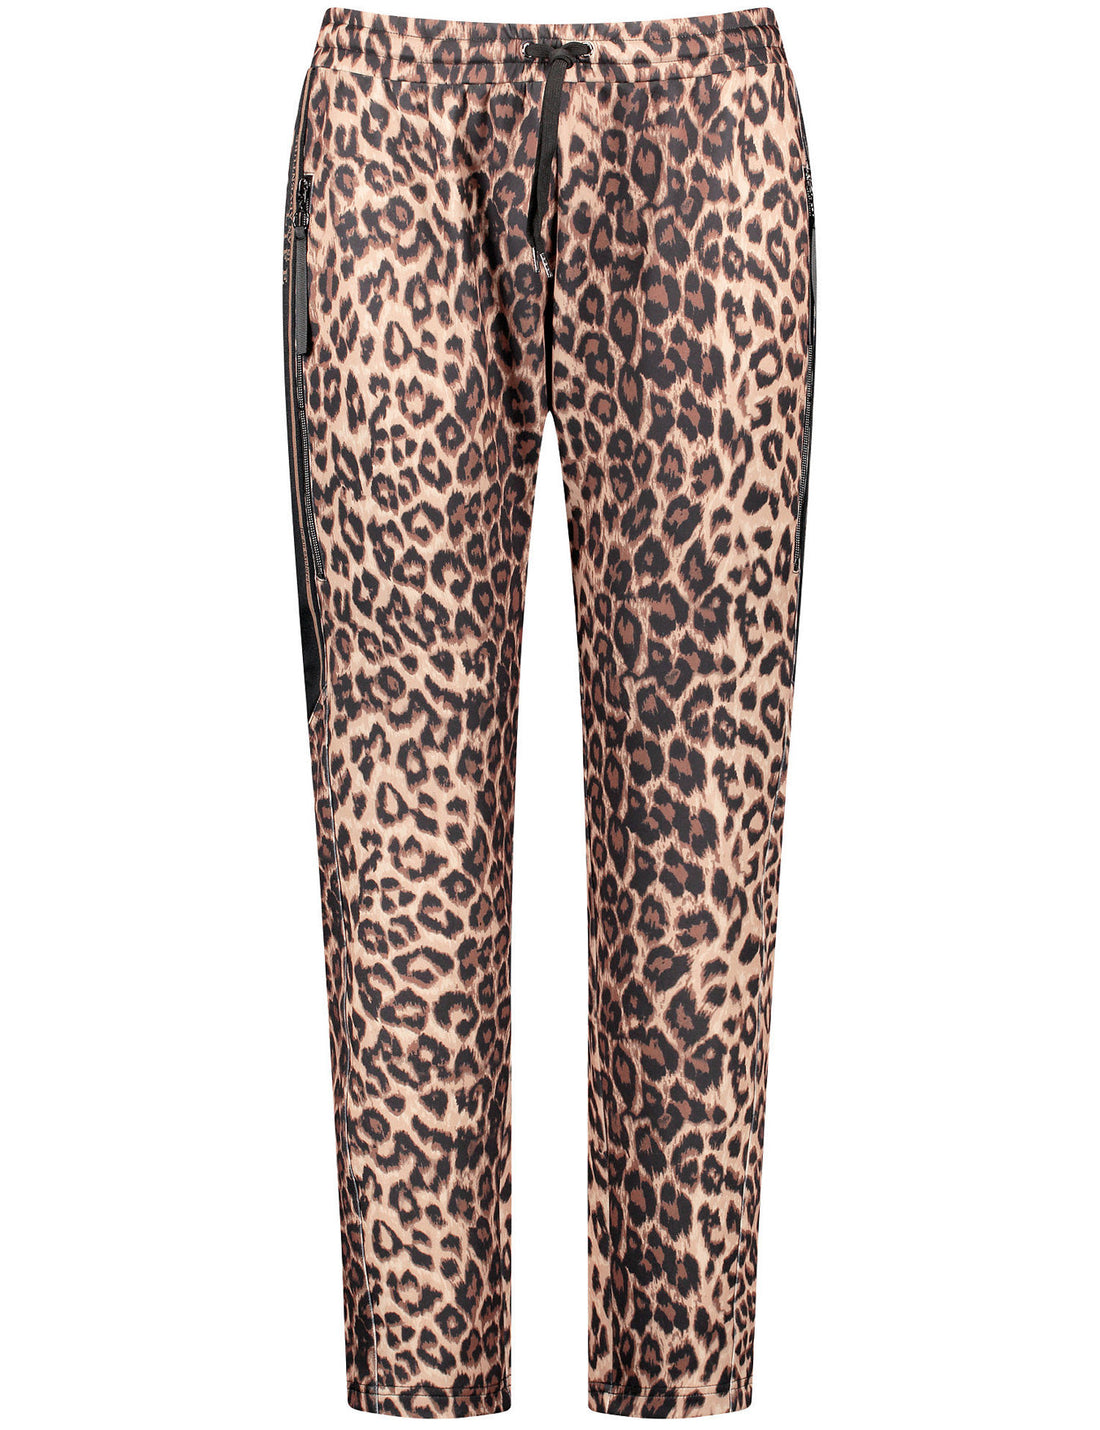 Tracksuit Bottoms With A Leopard Print Pattern_321203-26329_1102_02